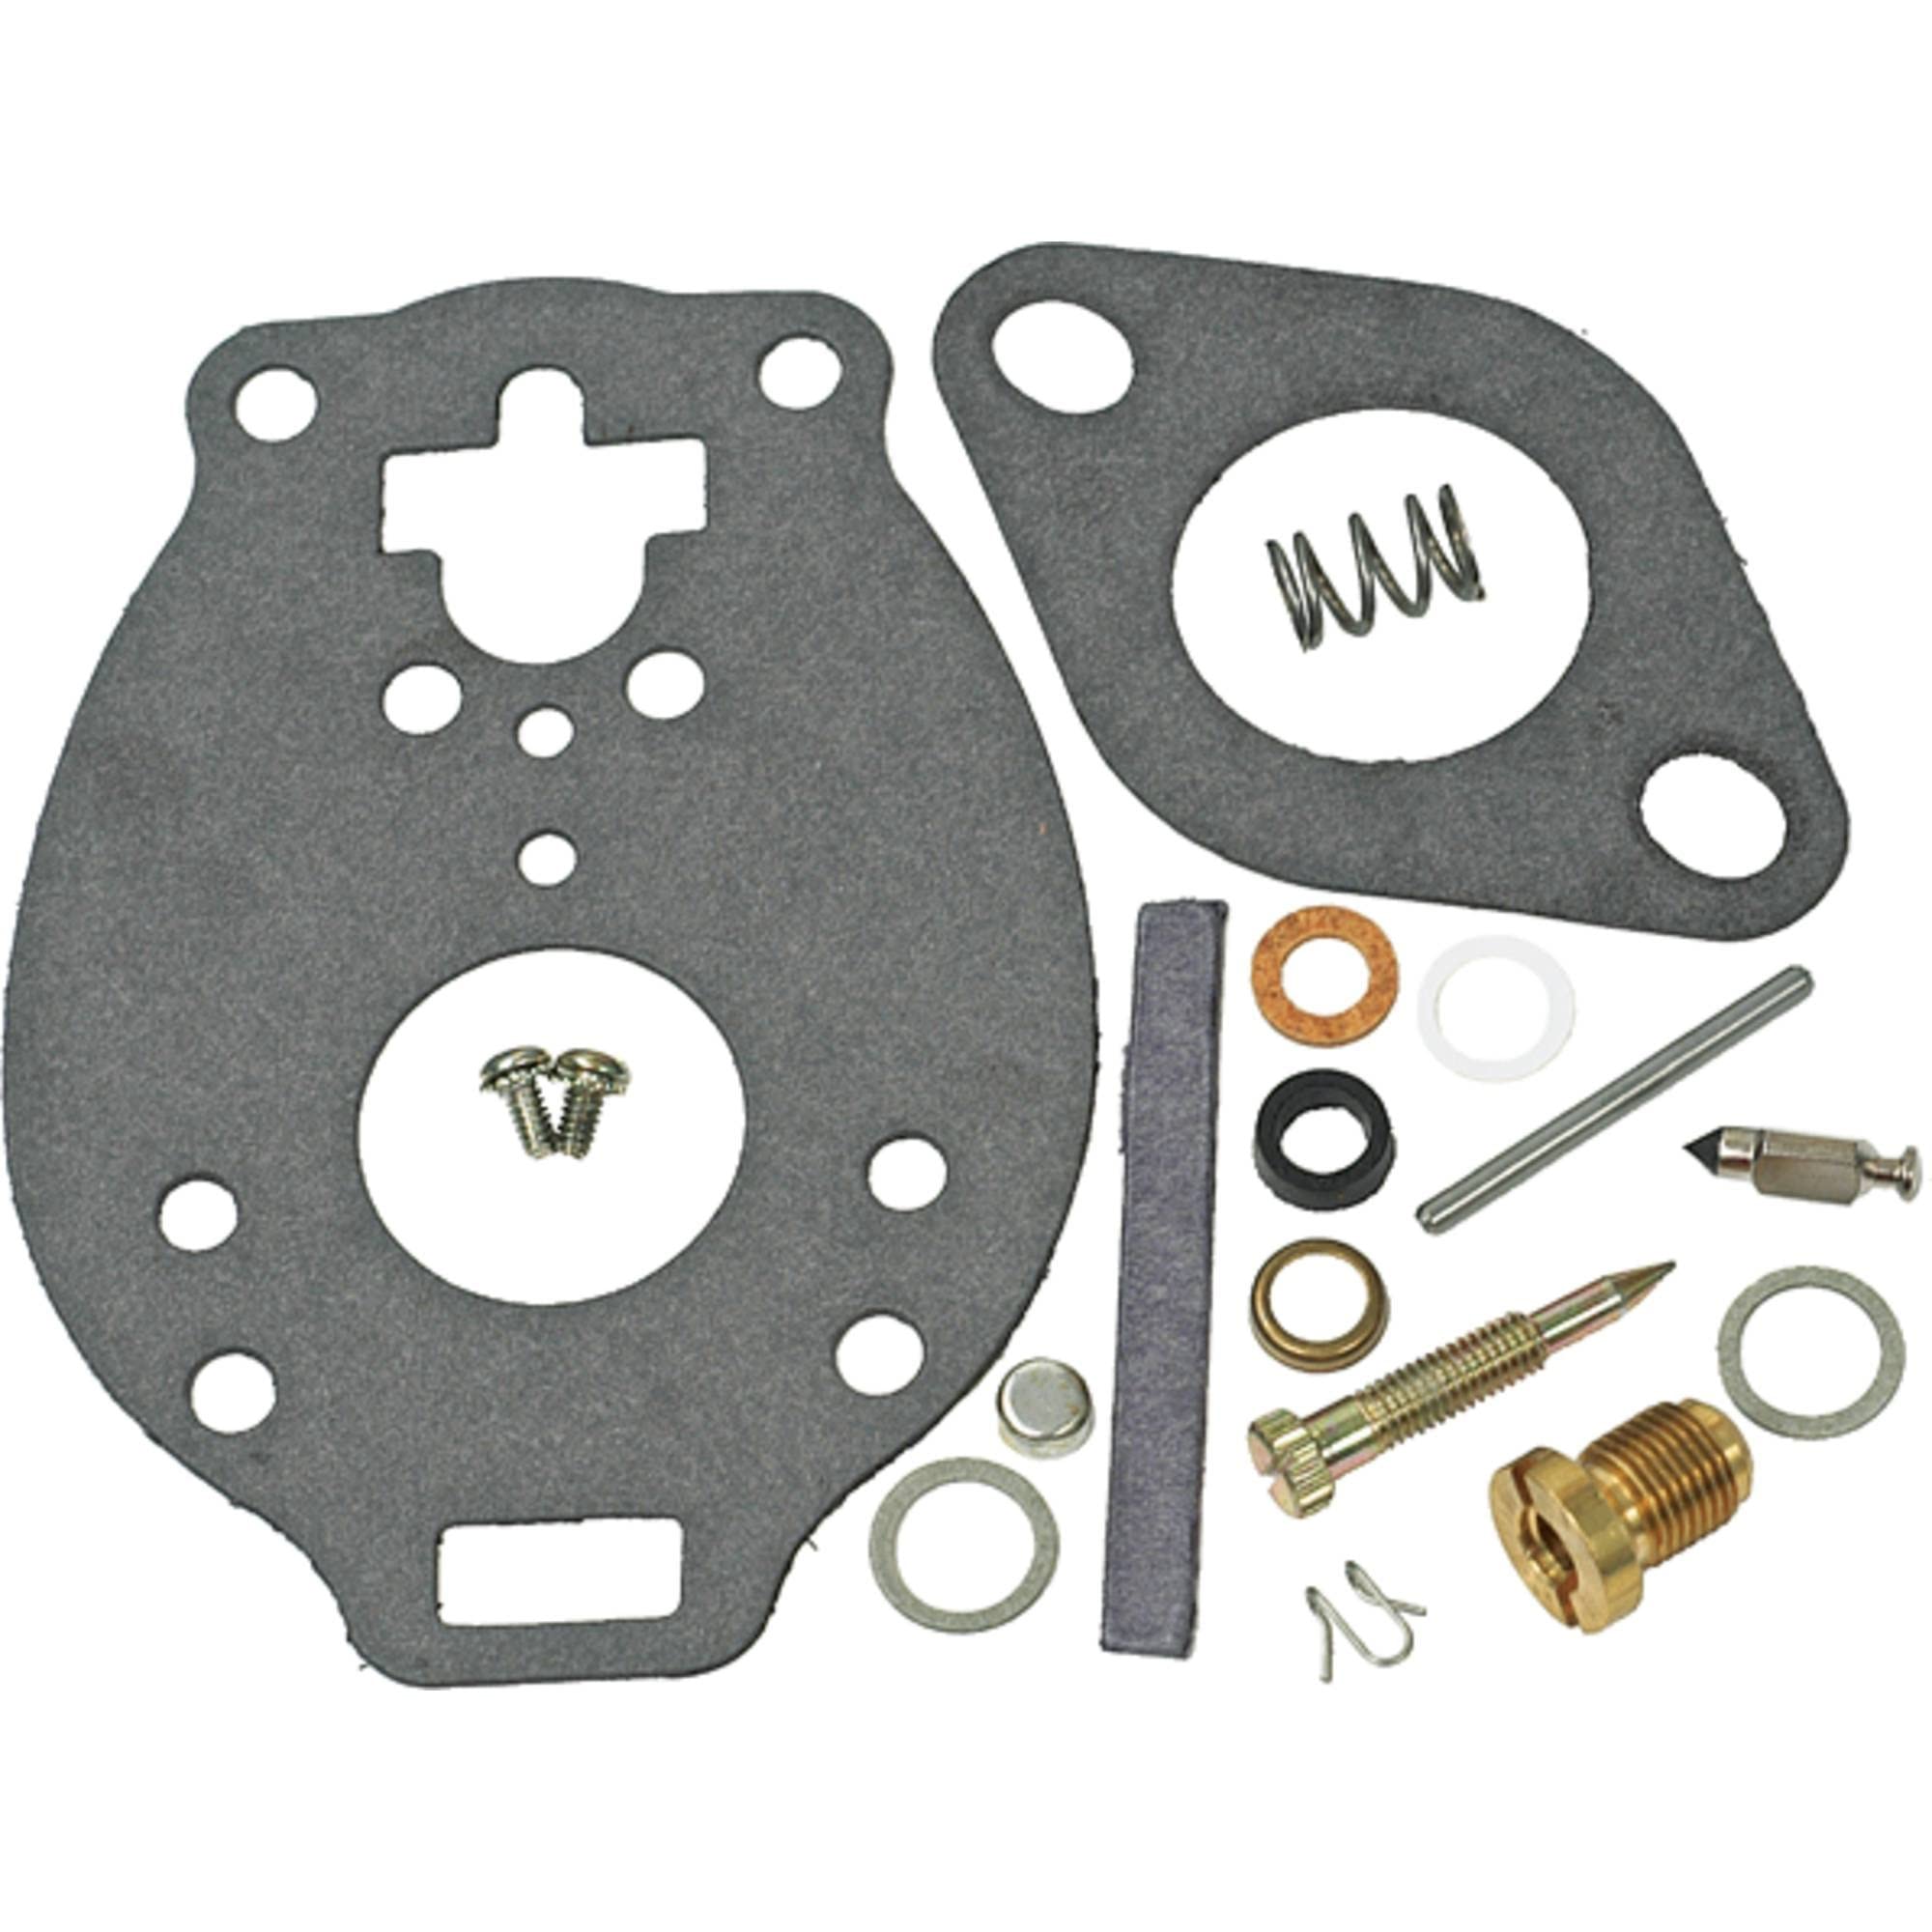 DB Electrical New Zenith Fuel System Repair Kit Compatible with/Replacement for Marvel-Schebler Carburetors K7512